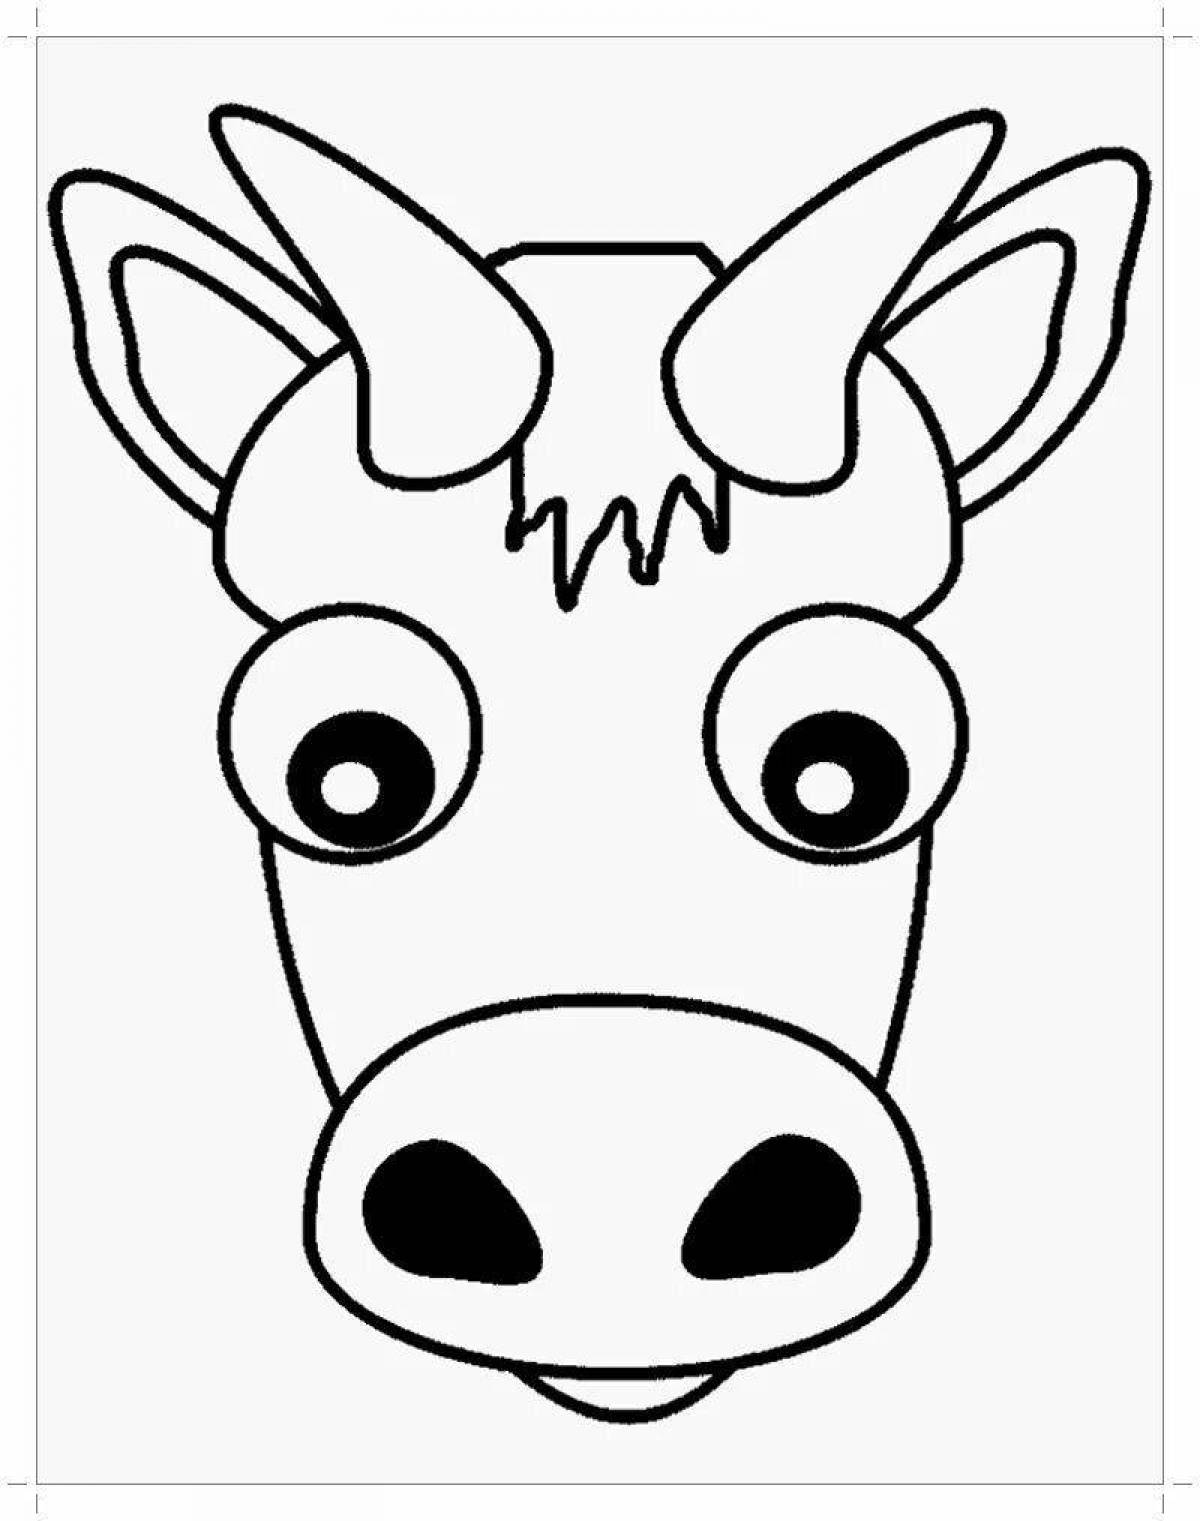 Coloring book witty cow head